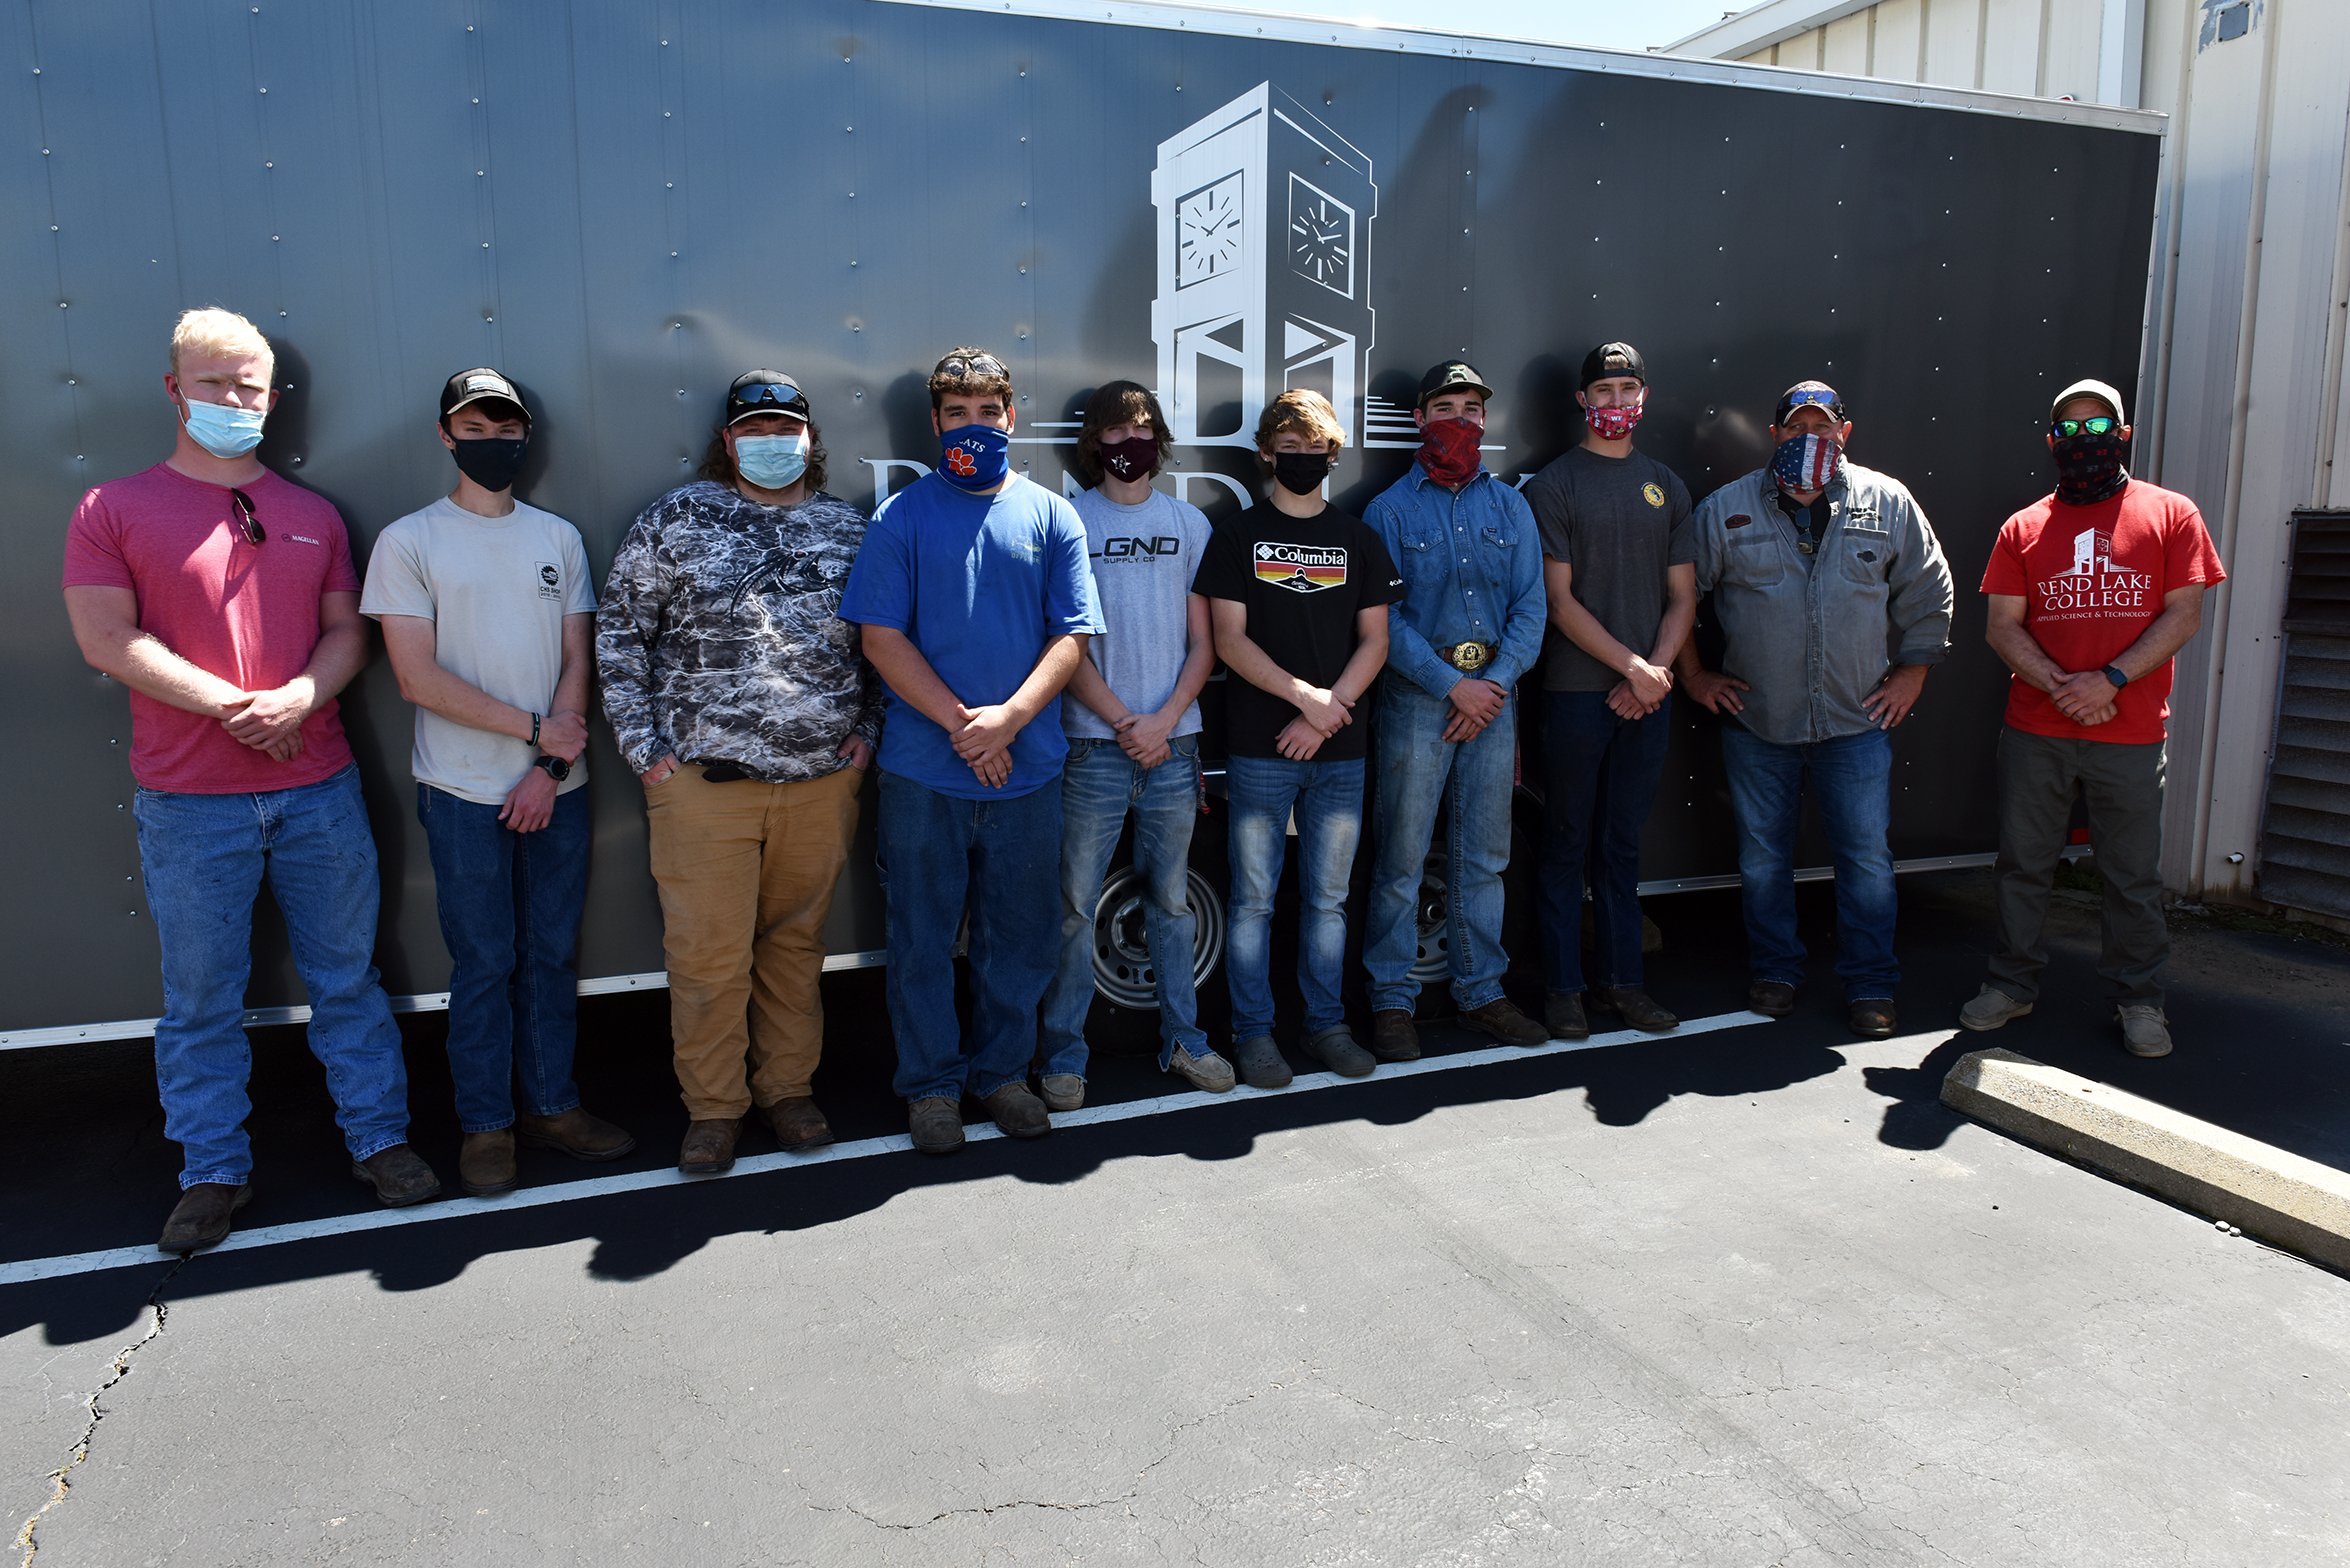 Reese earns top honor at RLC Welding competition